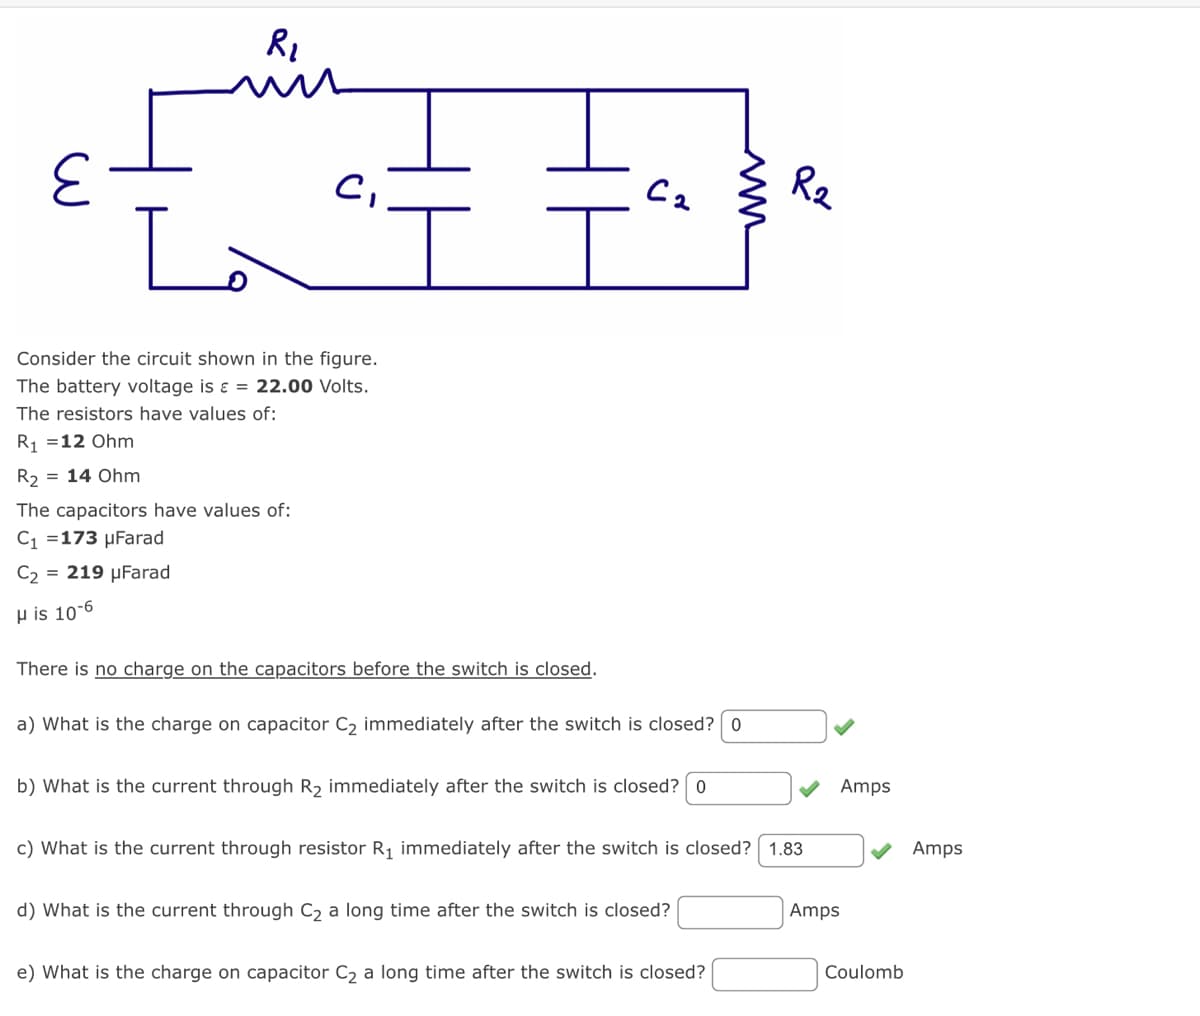 R₂
C₁
Consider the circuit shown in the figure.
The battery voltage is = 22.00 Volts.
The resistors have values of:
R₁ =12 Ohm
R₂ = 14 Ohm
The capacitors have values of:
C₁ =173 μFarad
C₂ = 219 μFarad
His 10-6
T
There is no charge on the capacitors before the switch is closed.
C2
a) What is the charge on capacitor C₂ immediately after the switch is closed? 0
b) What is the current through R₂ immediately after the switch is closed? 0
c) What is the current through resistor R₁ immediately after the switch is closed? 1.83
d) What is the current through C₂ a long time after the switch is closed?
R2
e) What is the charge on capacitor C₂ a long time after the switch is closed?
Amps
Amps
Coulomb
Amps